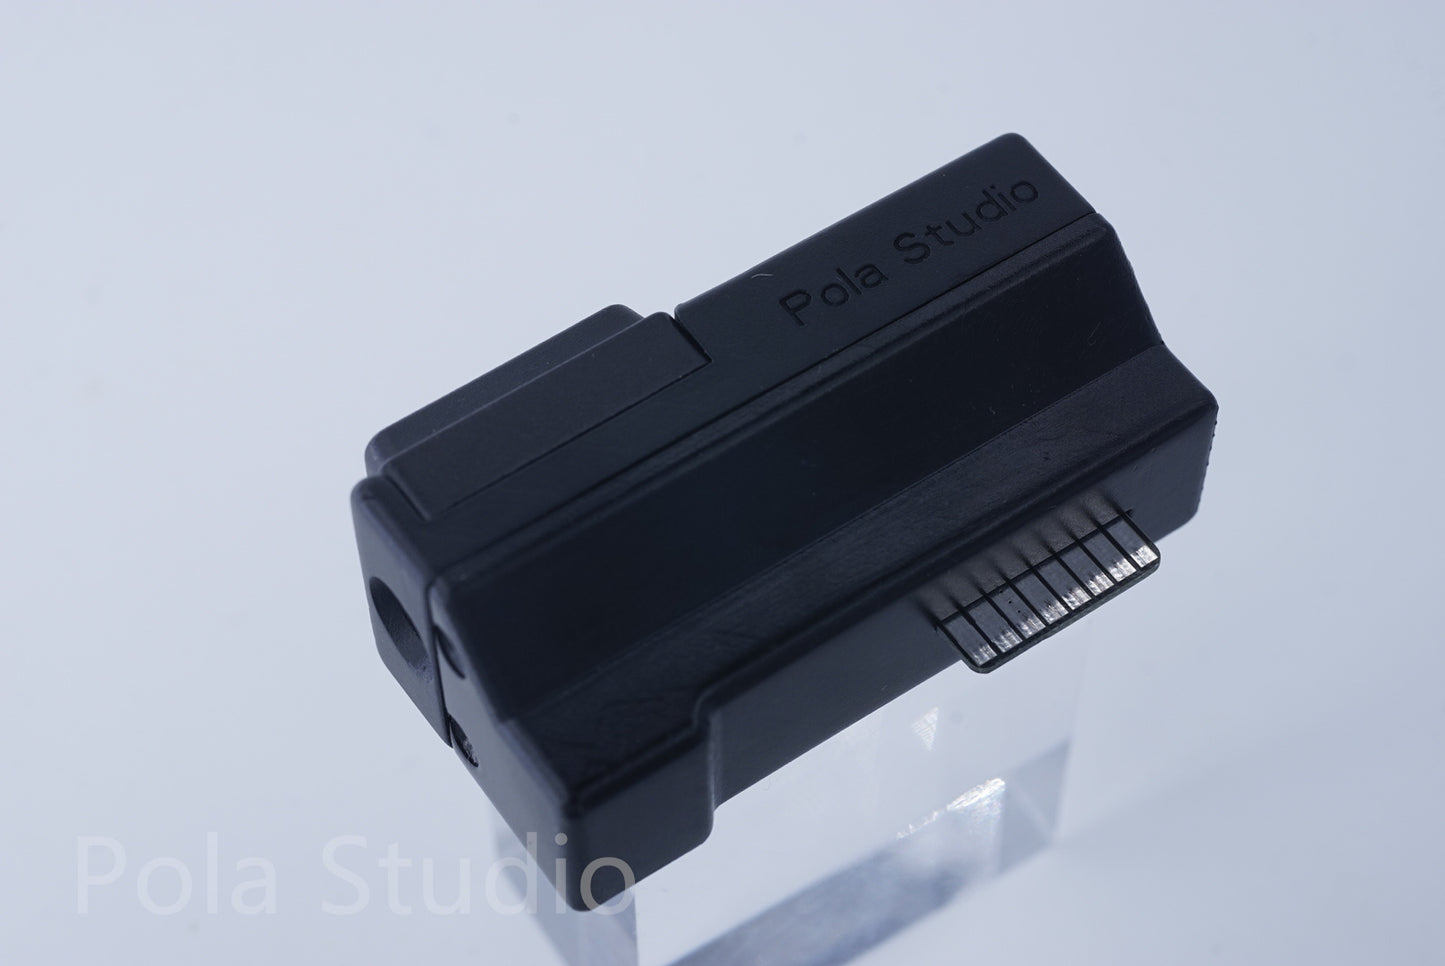 Flash adapters for the Polaroid SX-70、Sonar hot shoe